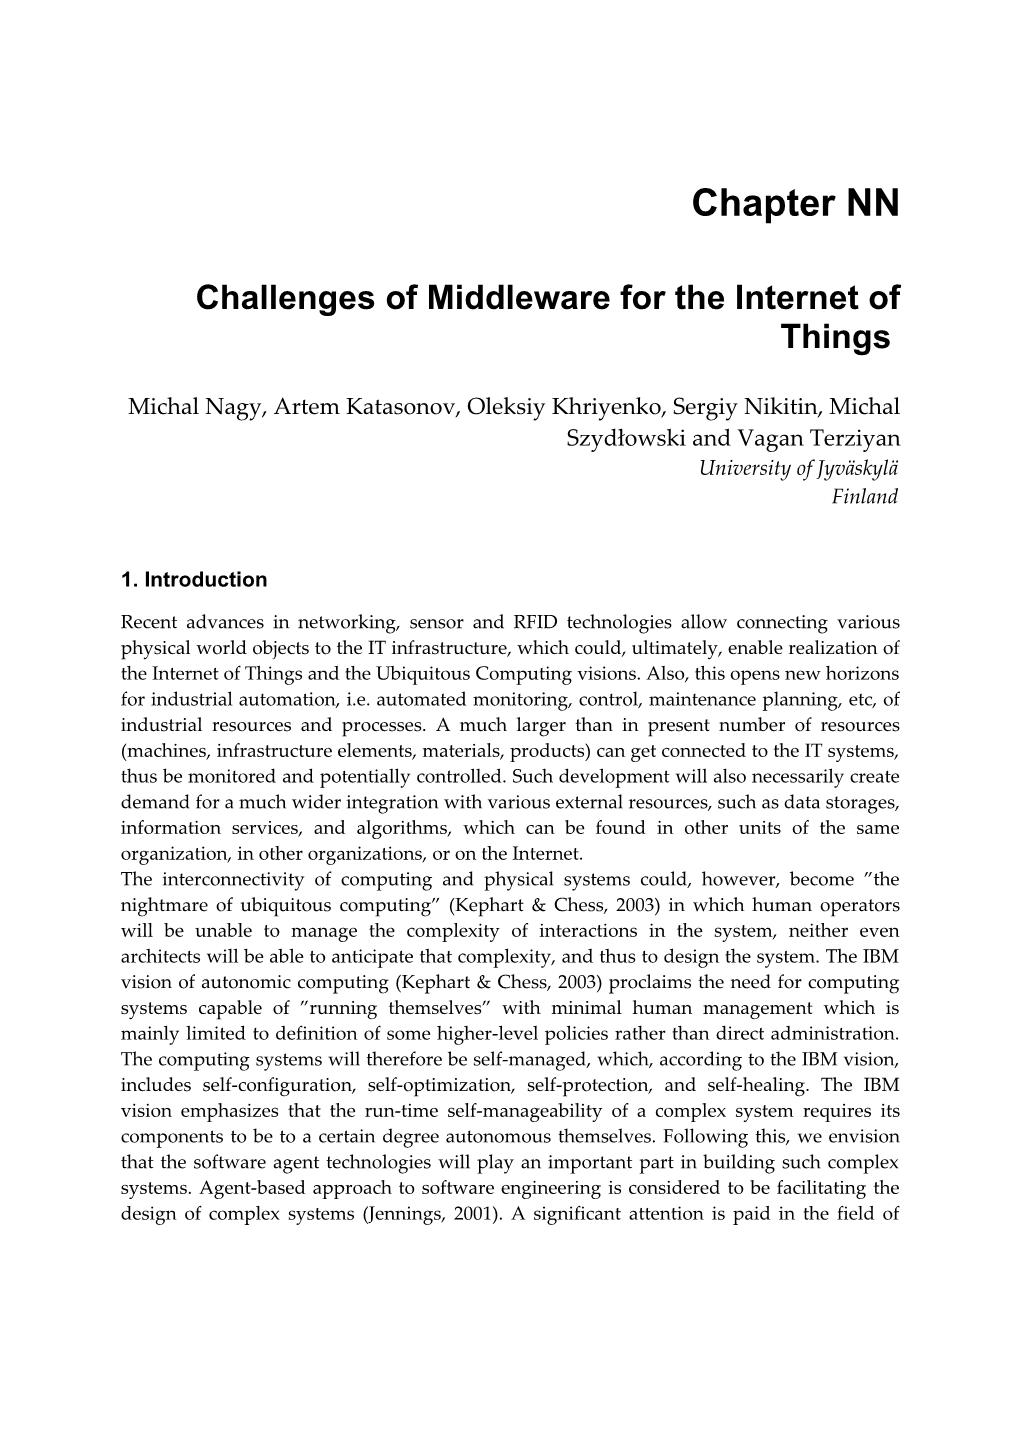 Challenges of Middleware for the Internet of Things